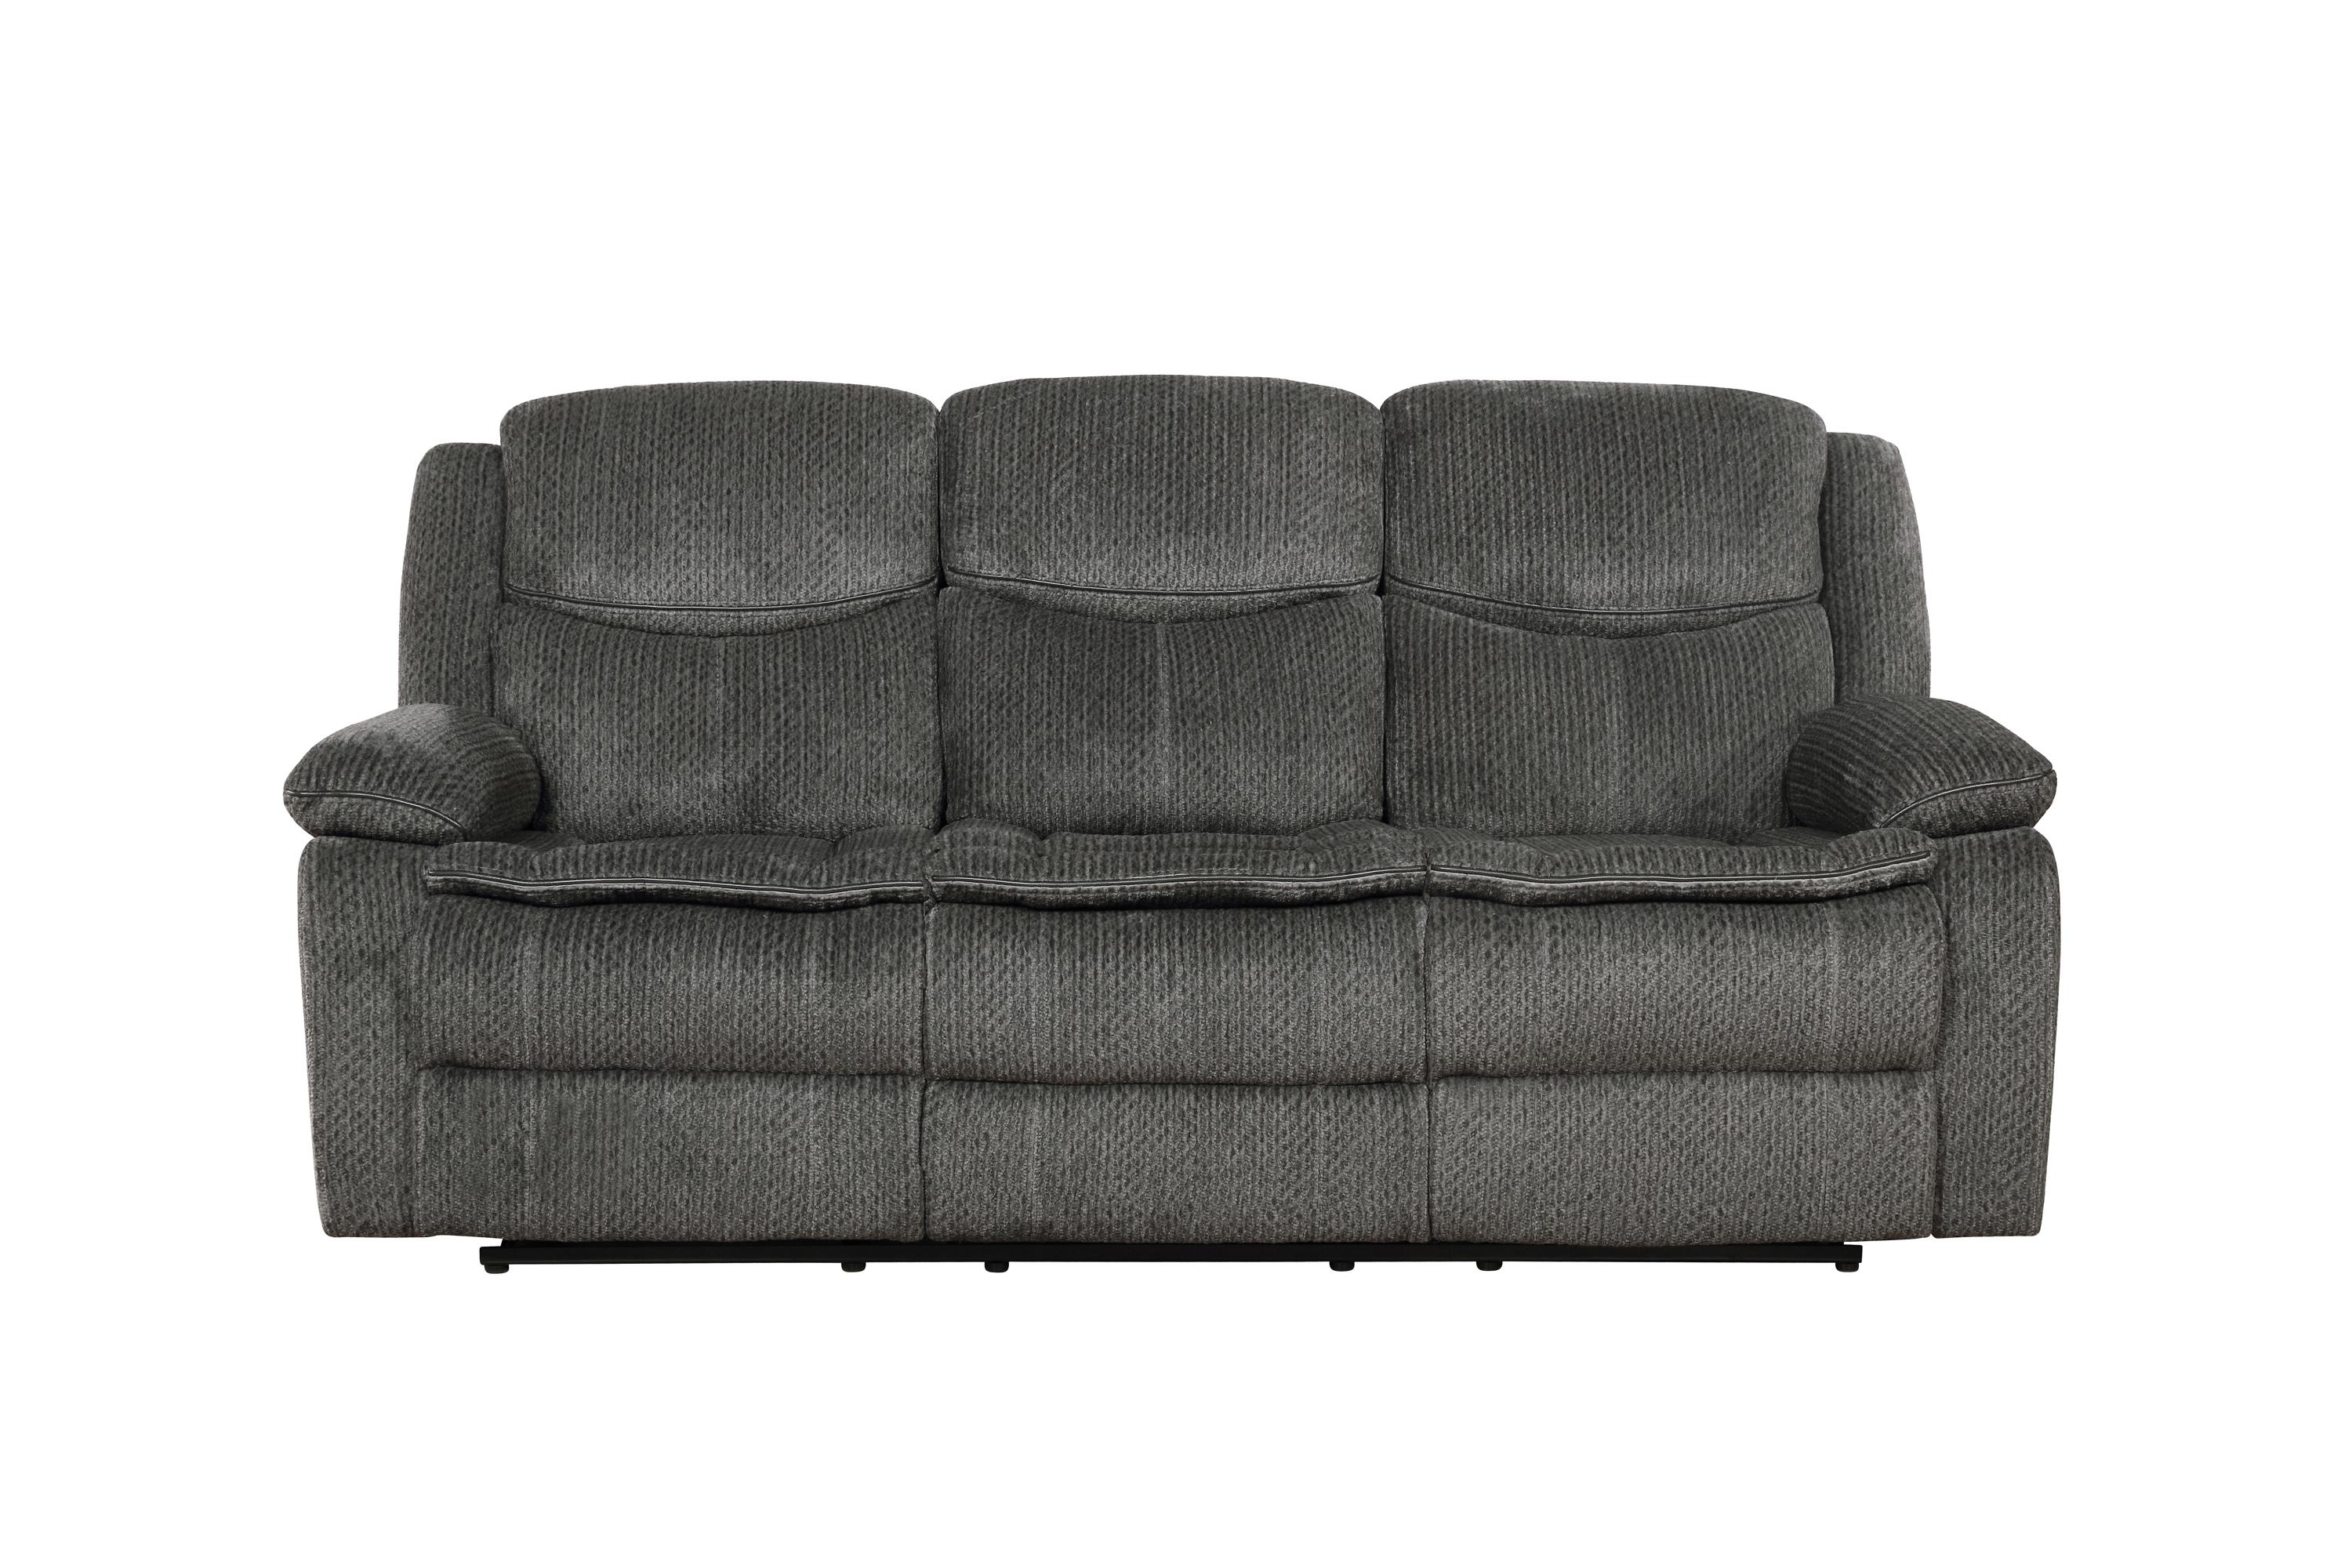 Modern Motion Sofa 610254 Jennings 610254 in Charcoal Chenille